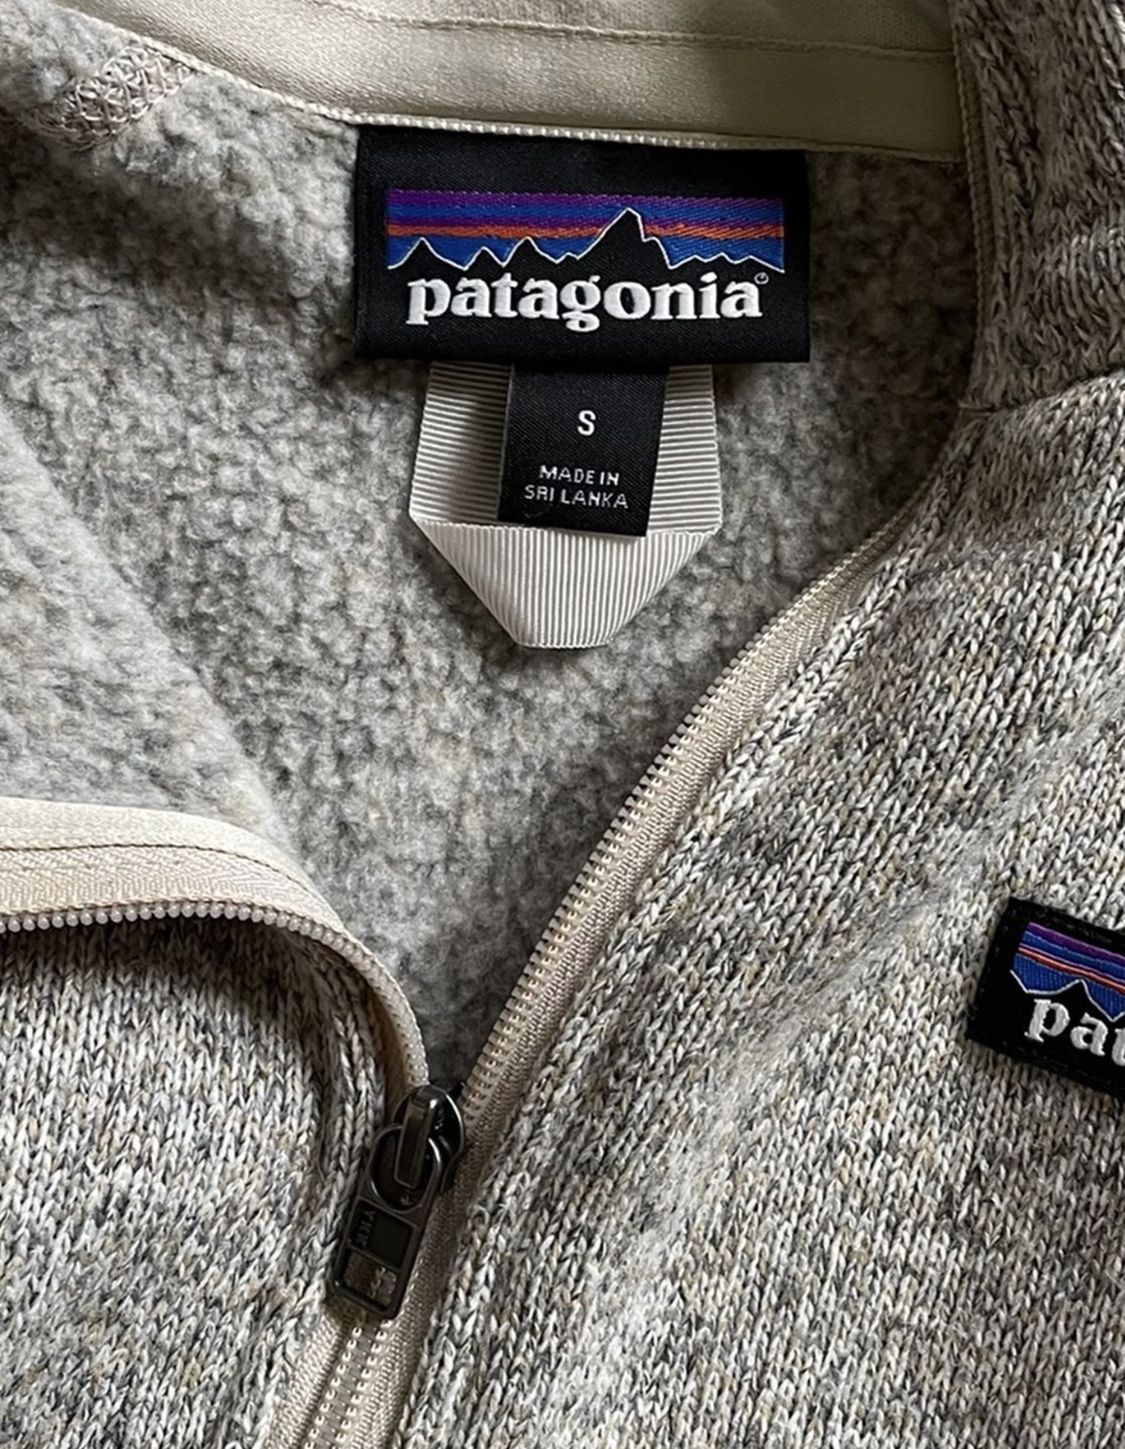 Patagonia Pullover Size Small